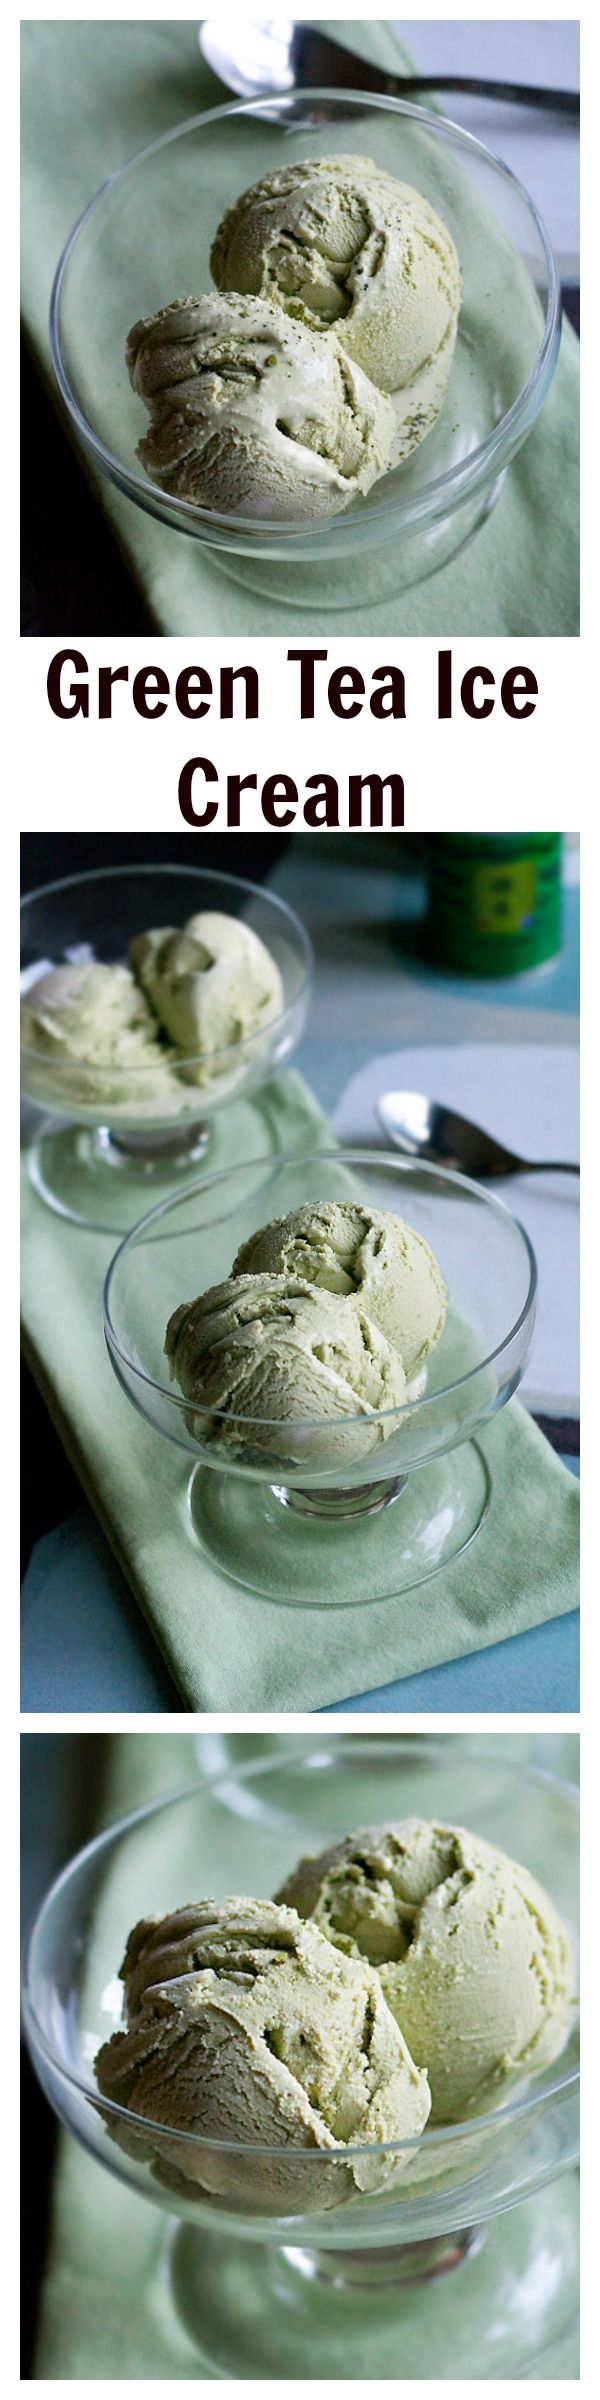 Easiest Matcha (green tea) ice cream recipe that takes only 2 ingredients and you don't have to pay $3 per scoop | rasamalaysia.com